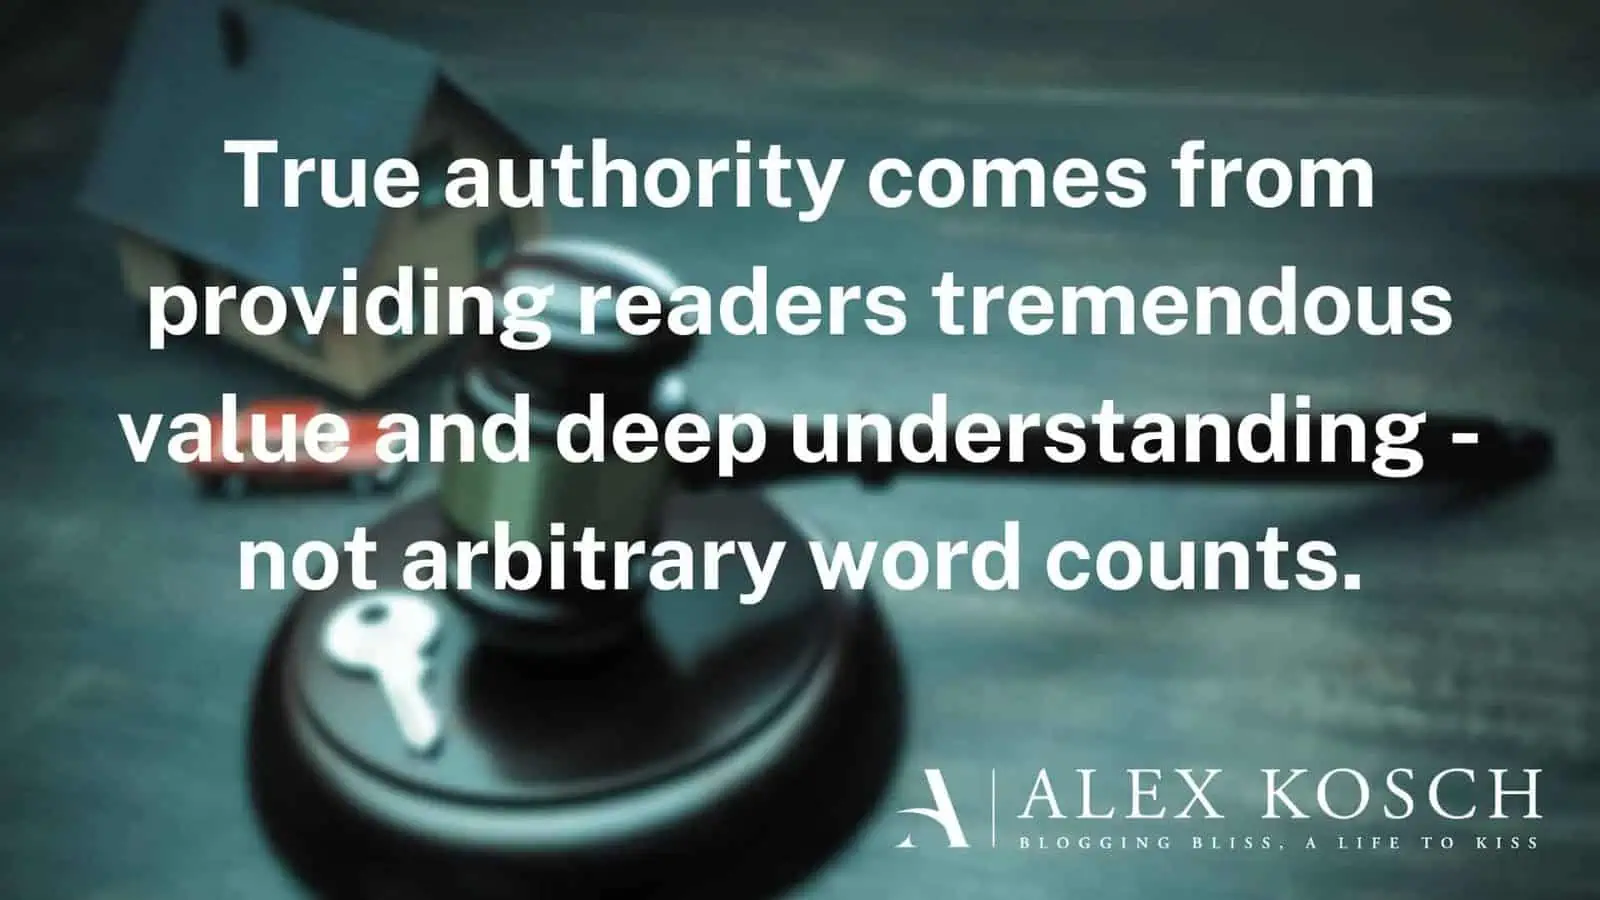 True authority comes from providing readers tremendous value and deep understanding - not arbitrary word counts.